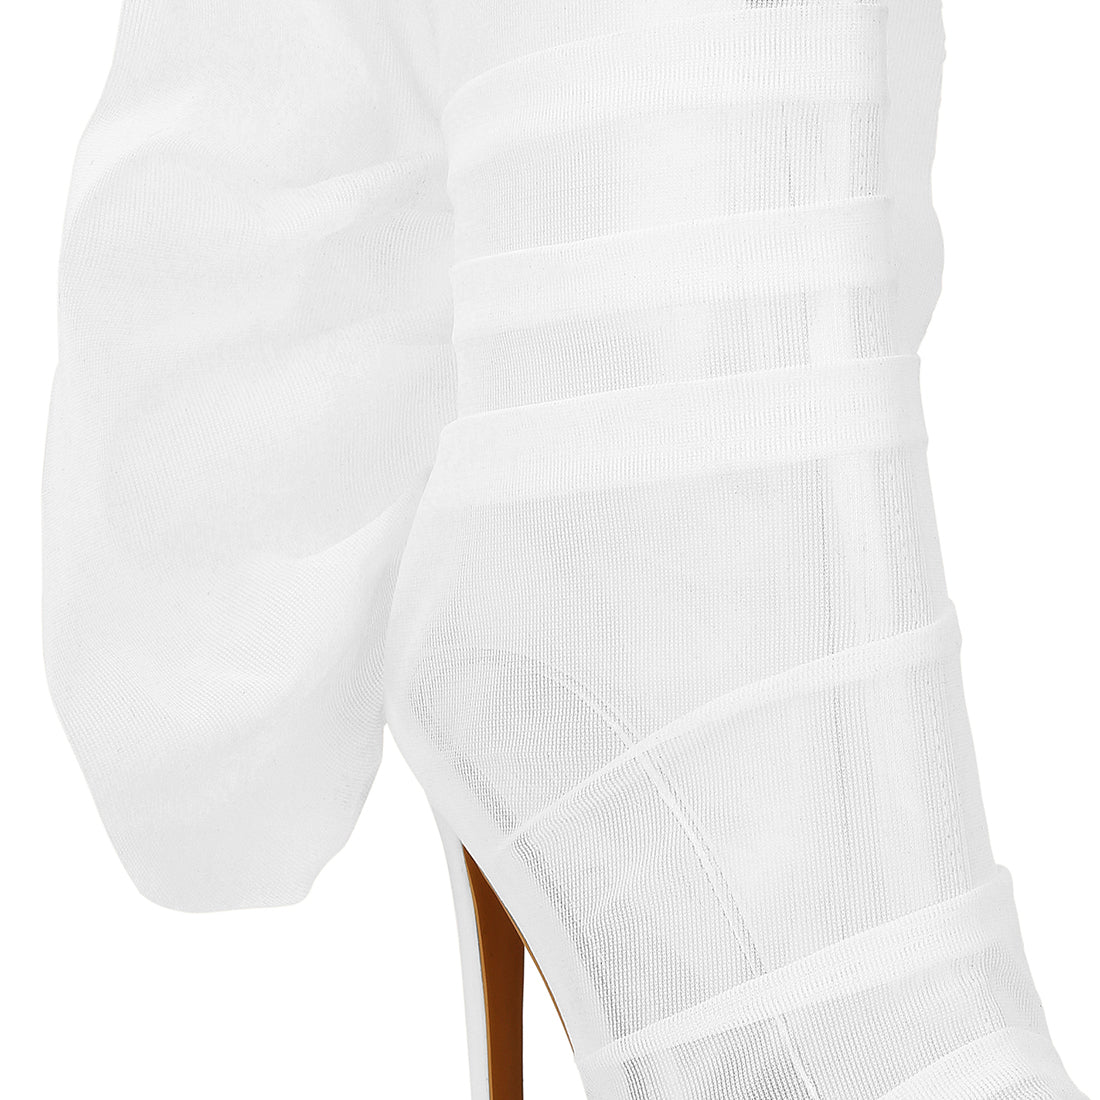 organza wrapped style heeled ankle boots#color_white